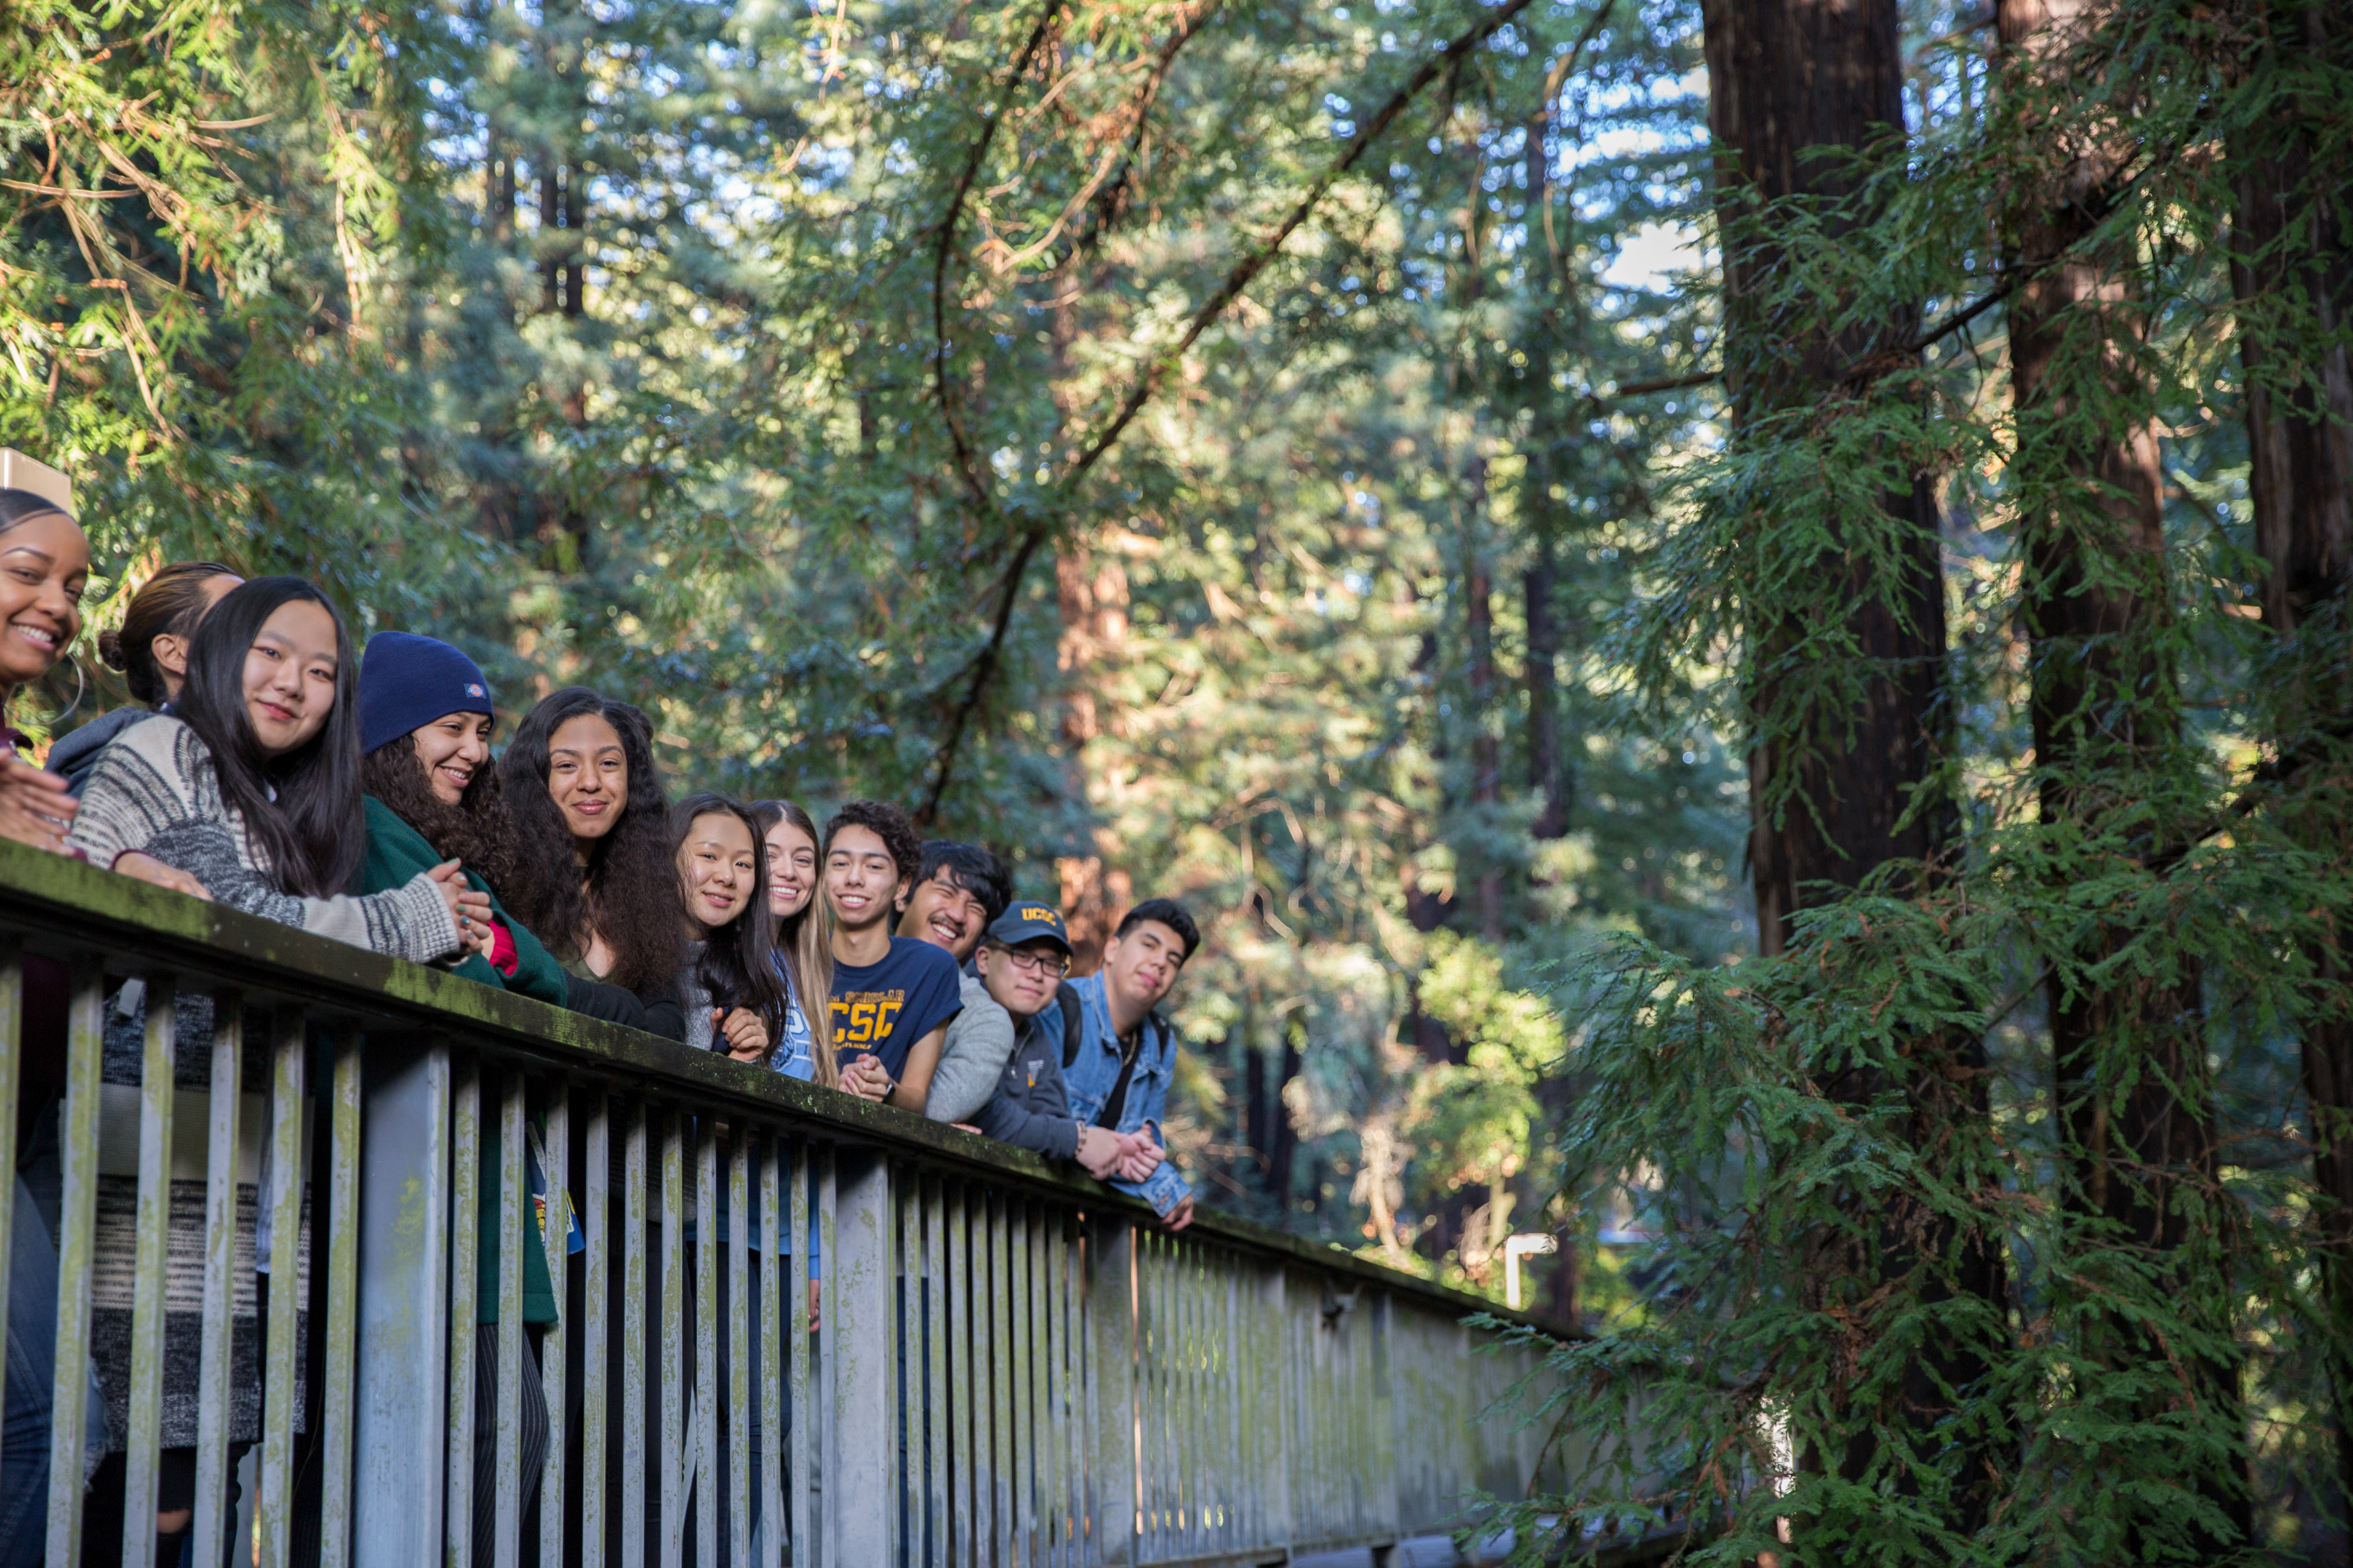 UCSC leadership shares bold vision for campus’s future with Regents